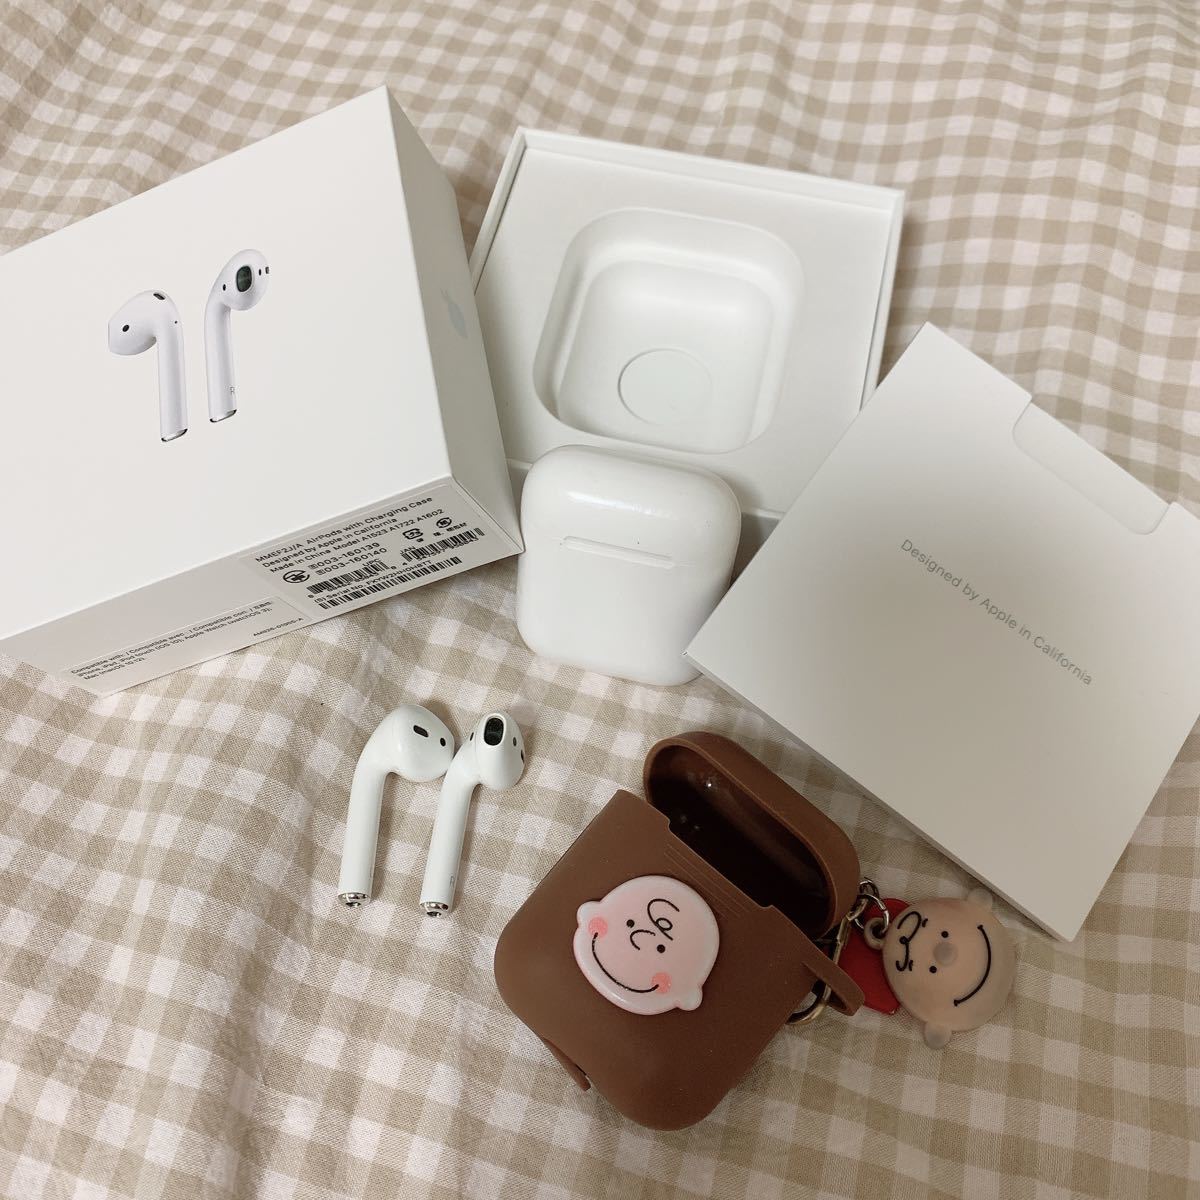 Apple純正Airpods 第二世代 箱付き ケース付き｜PayPayフリマ